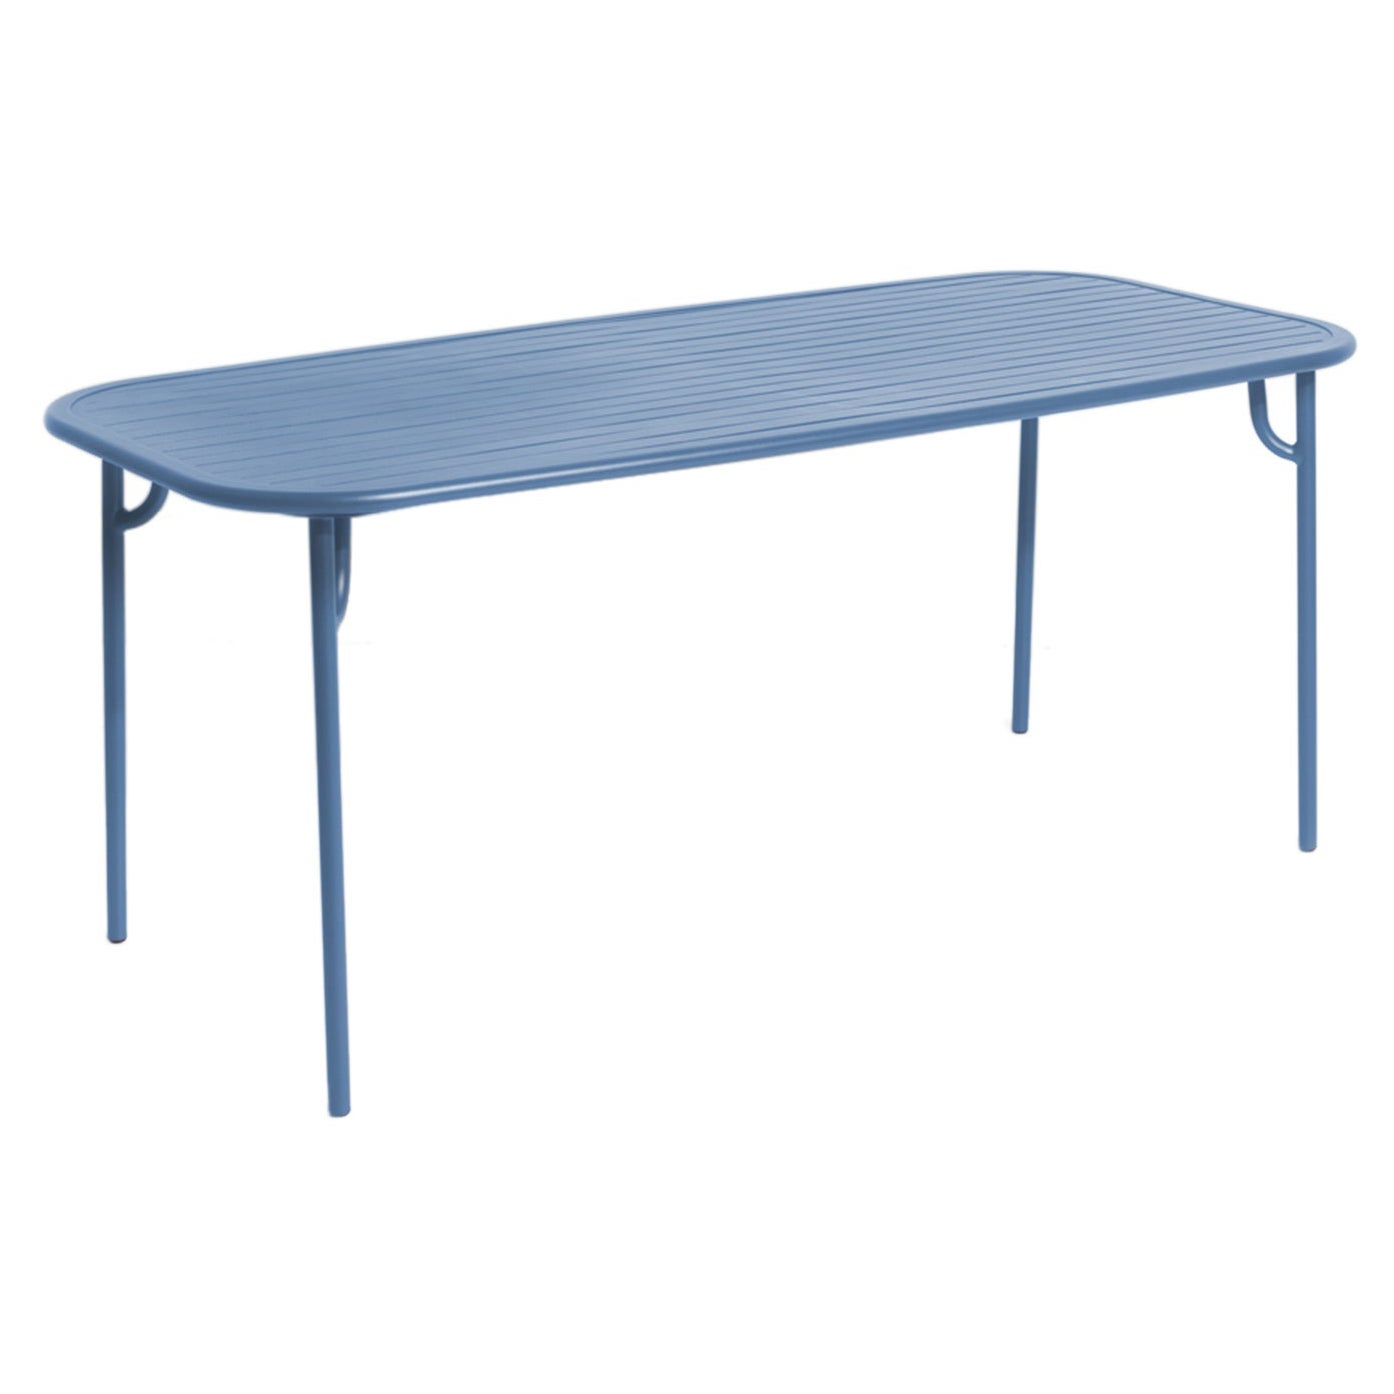 Petite Friture Week-End Medium Rectangular Dining Table in Azur Blue with Slats For Sale